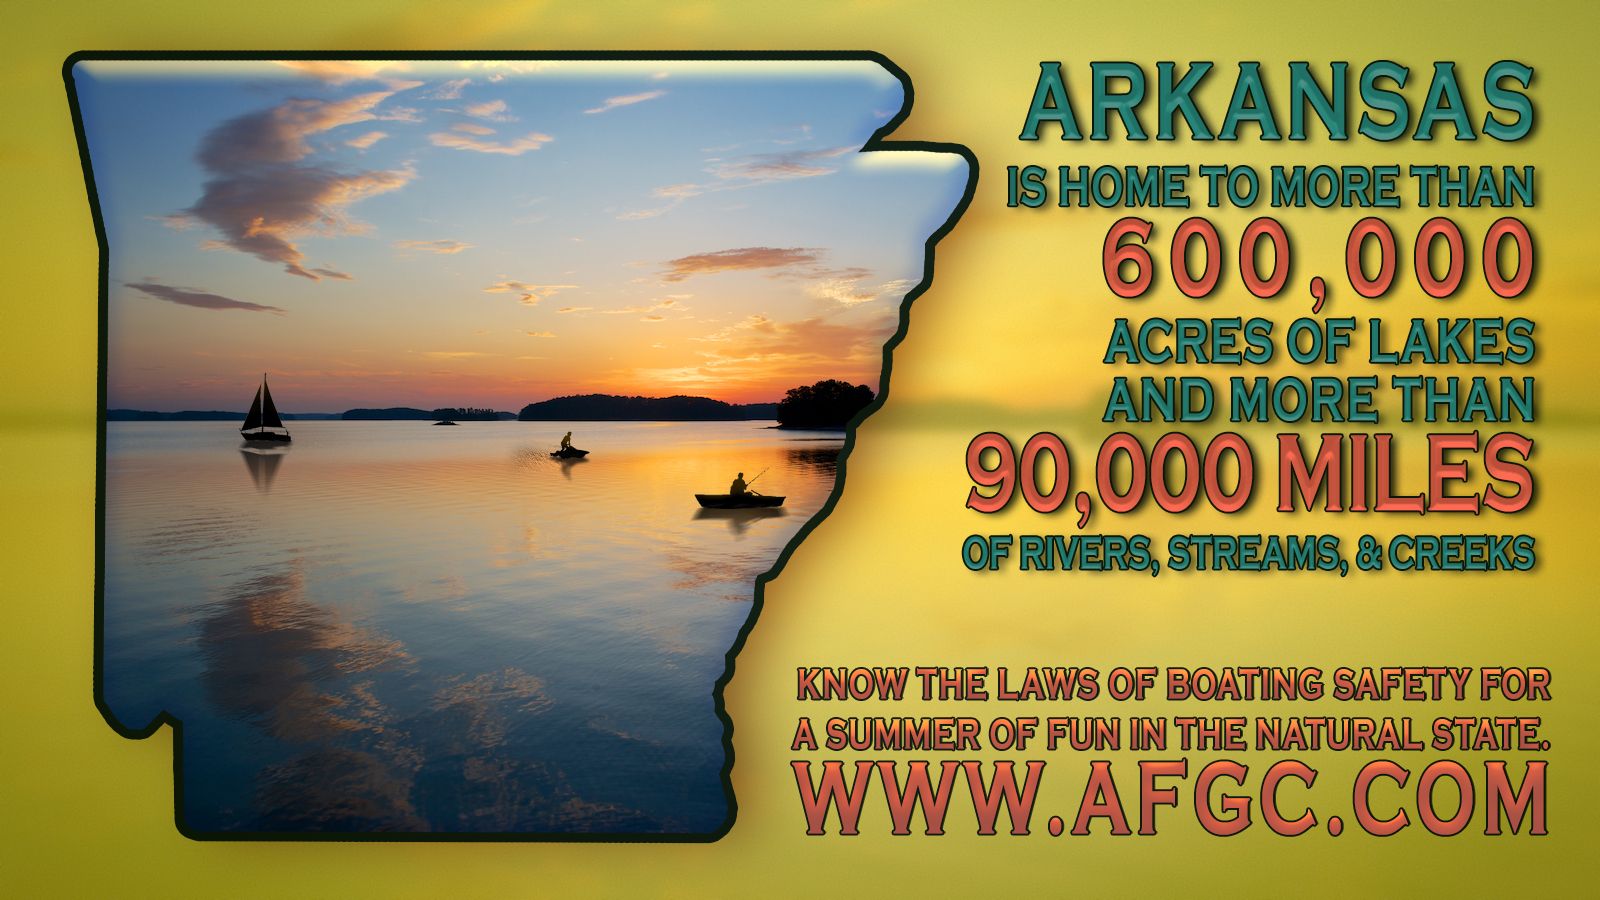 Boating Safety in the Natural State Arkansas House of Representatives